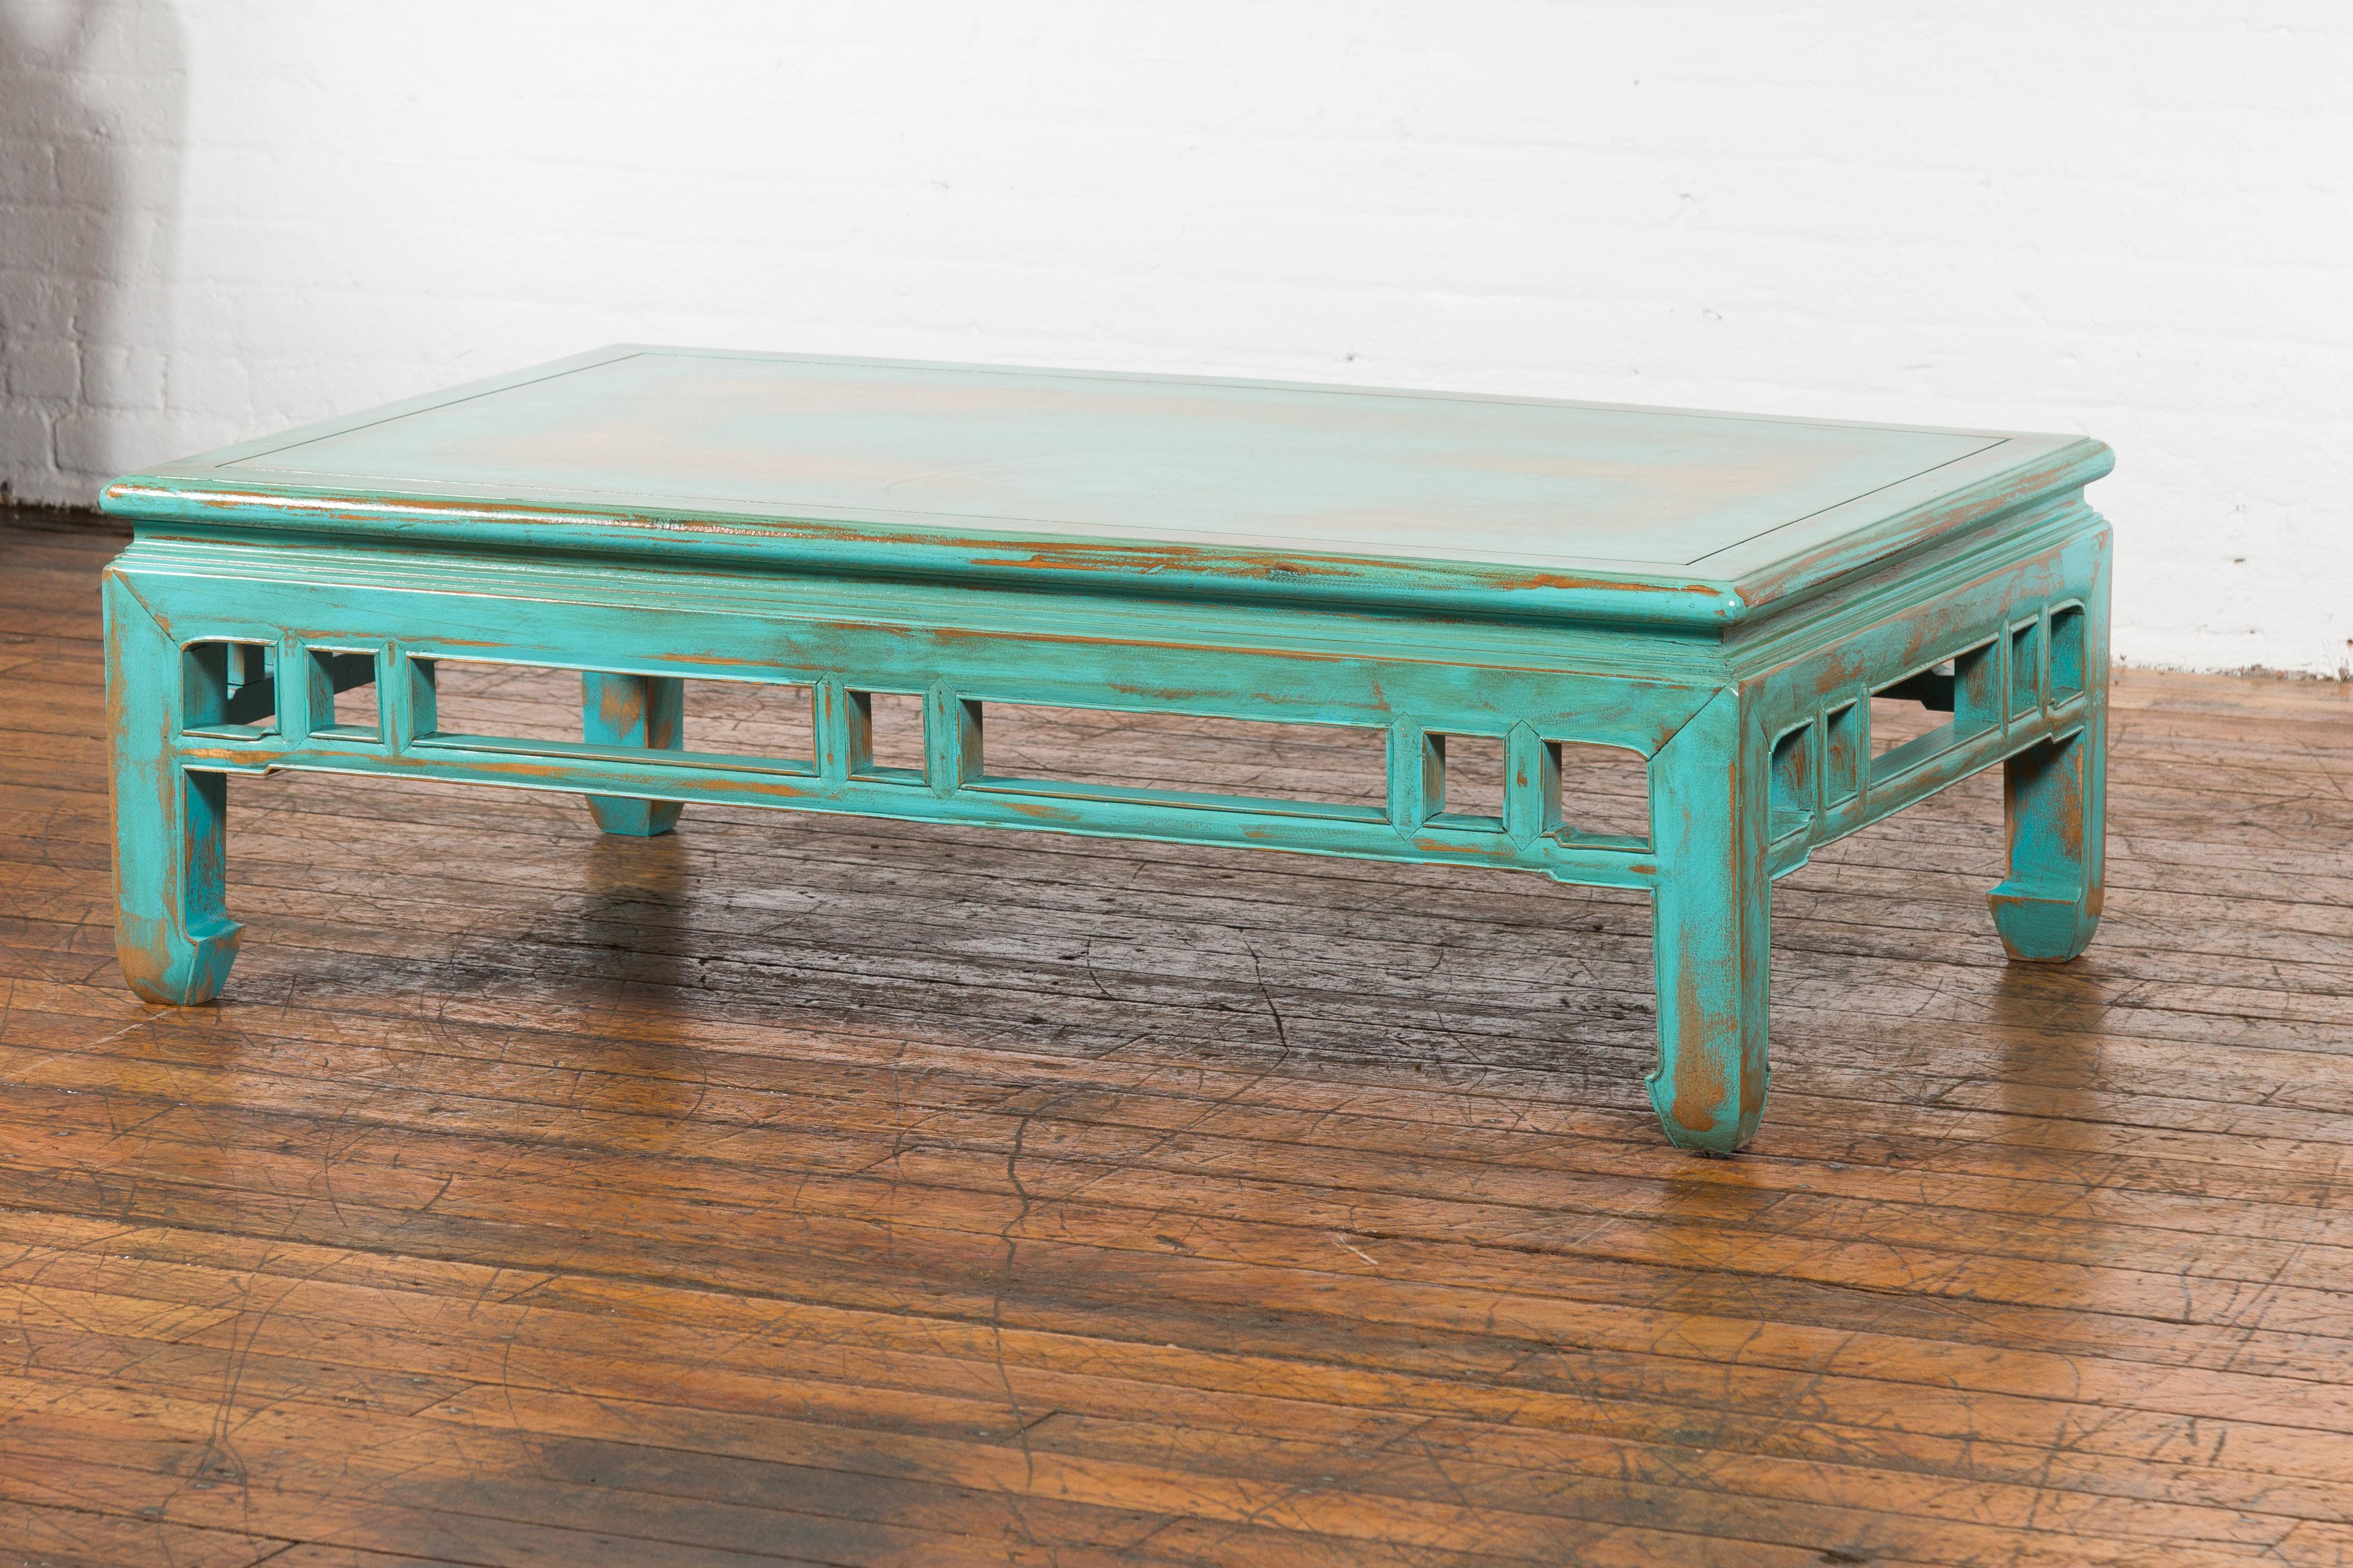 A Chinese Qing Dynasty period low Kang table from the 19th century, with open apron and humpback stretcher, restored with custom aqua teal distressed lacquer. Created in China during the Qing Dynasty period in the 19th century, this low kang table